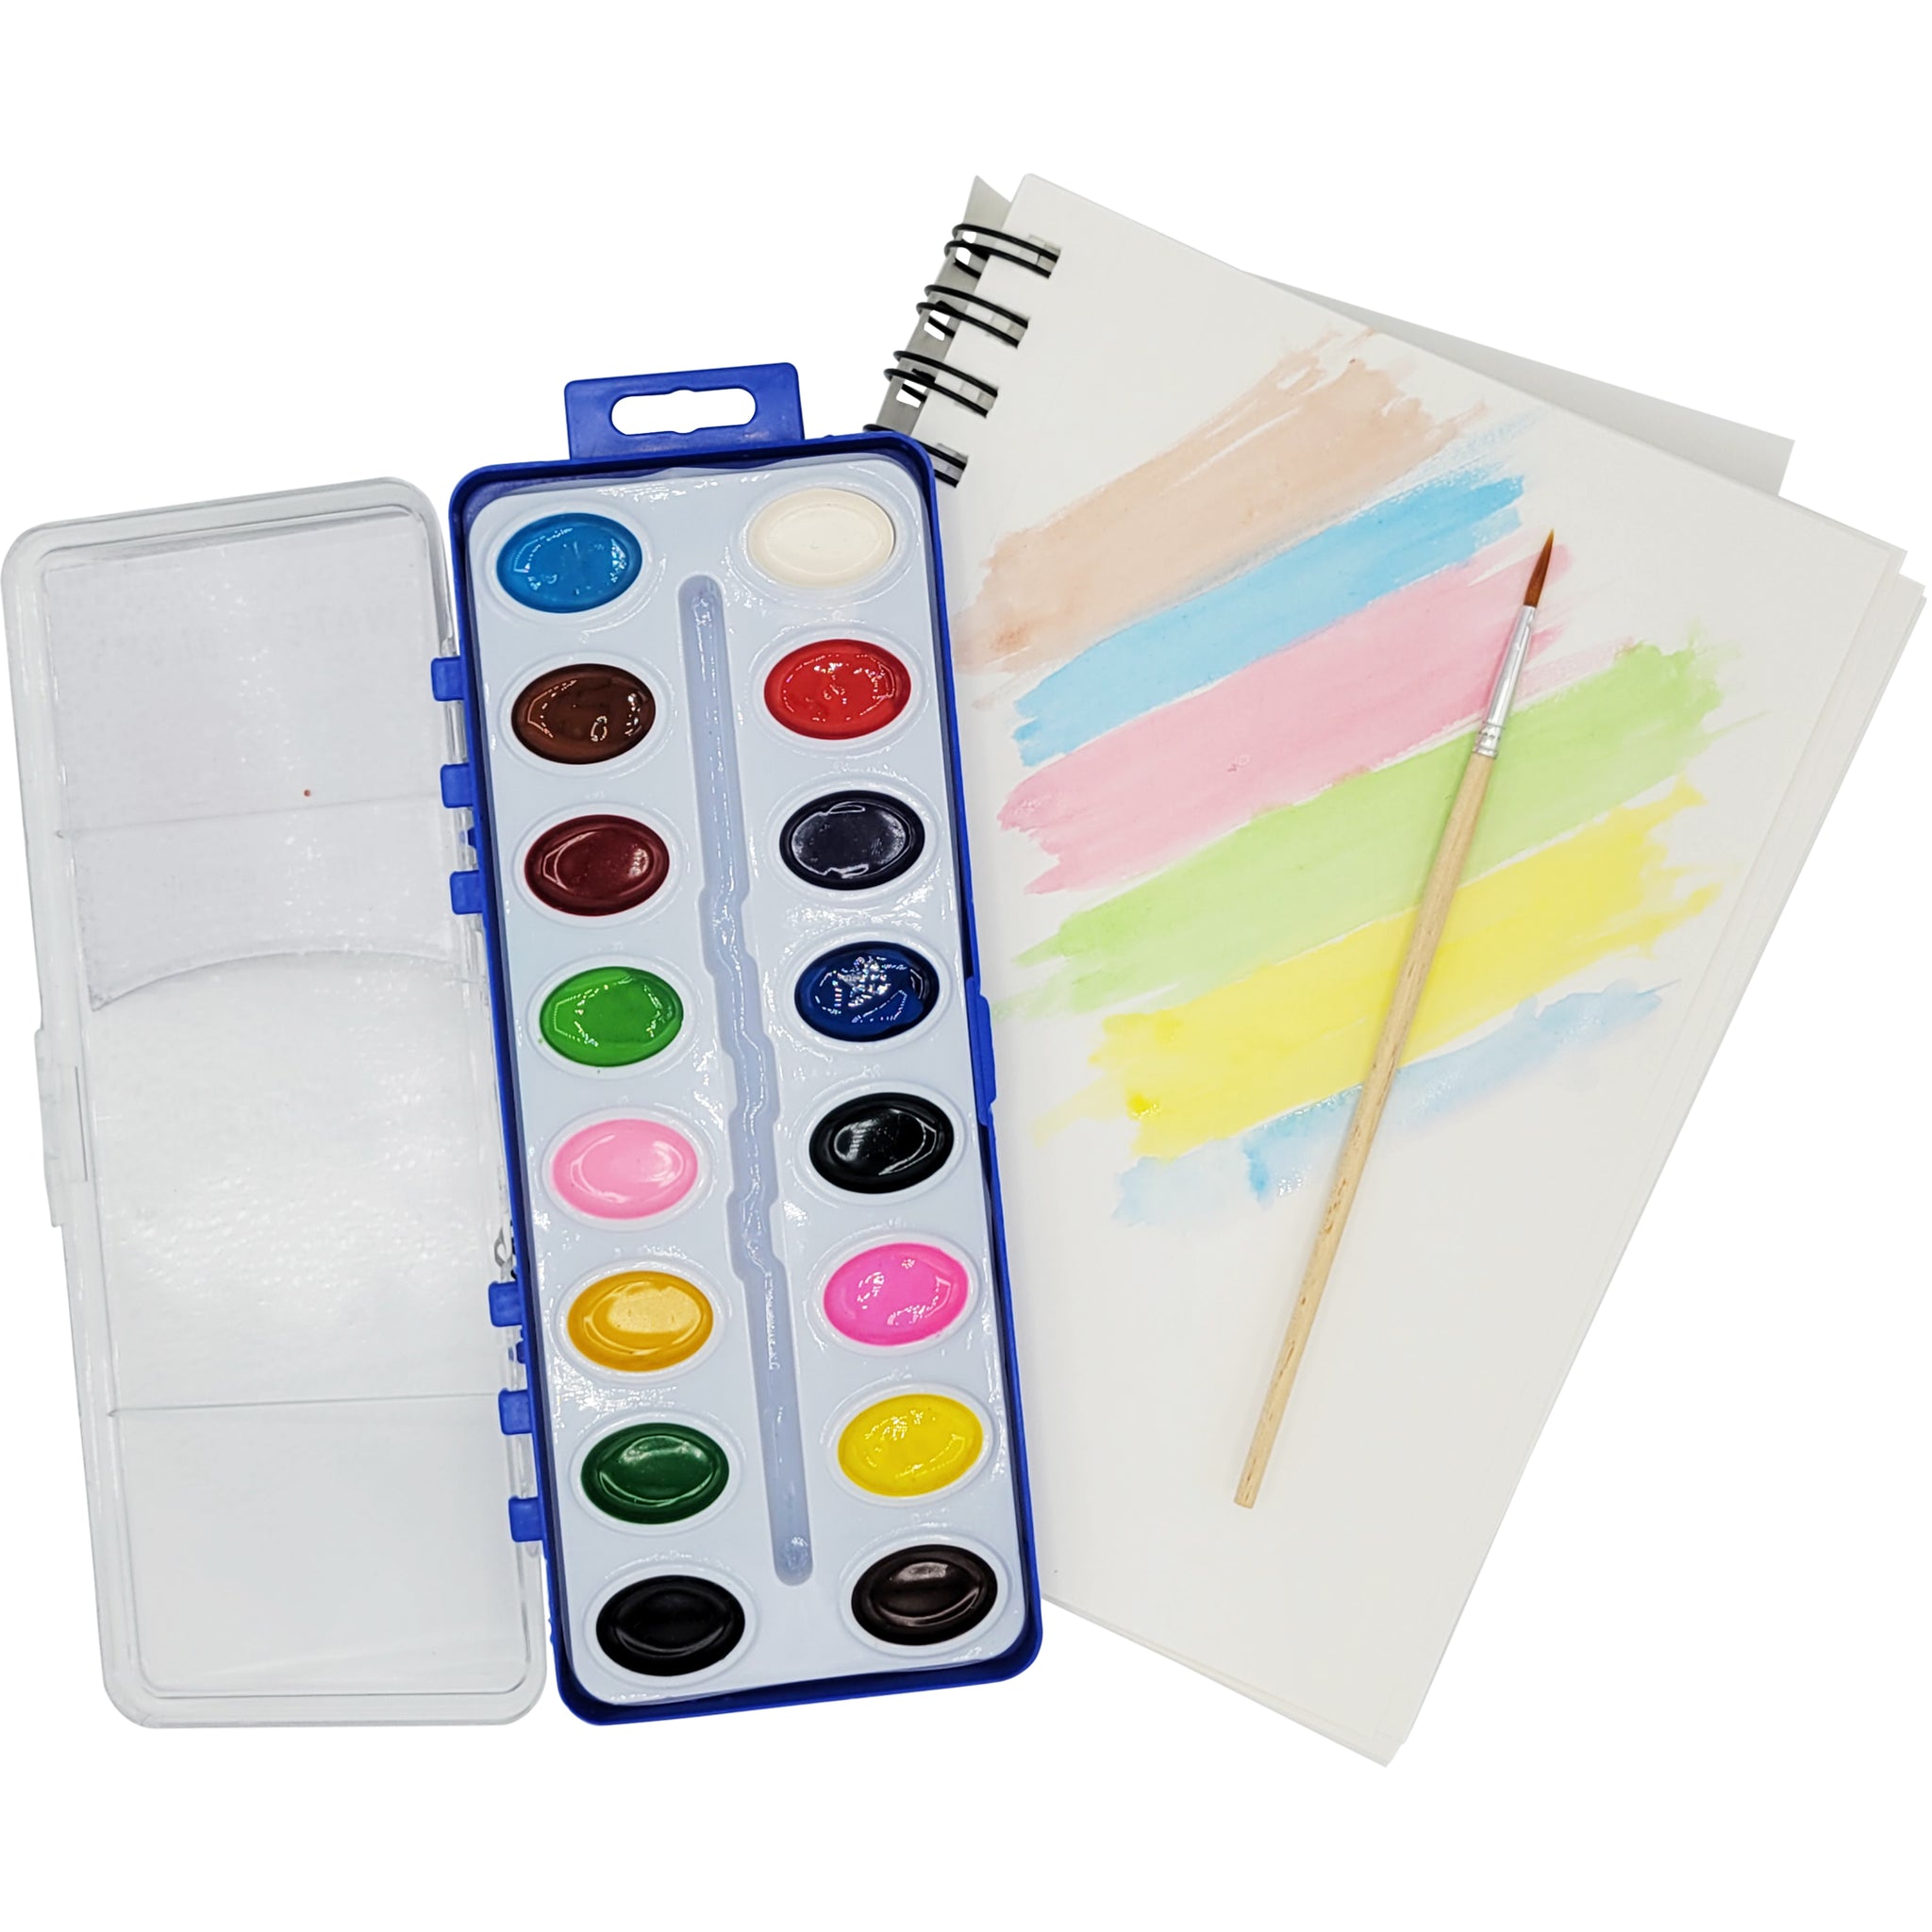 18 Set Watercolor Paint Pack with Quality Wood Brushes 16 Colors Washa –  ColorSwell